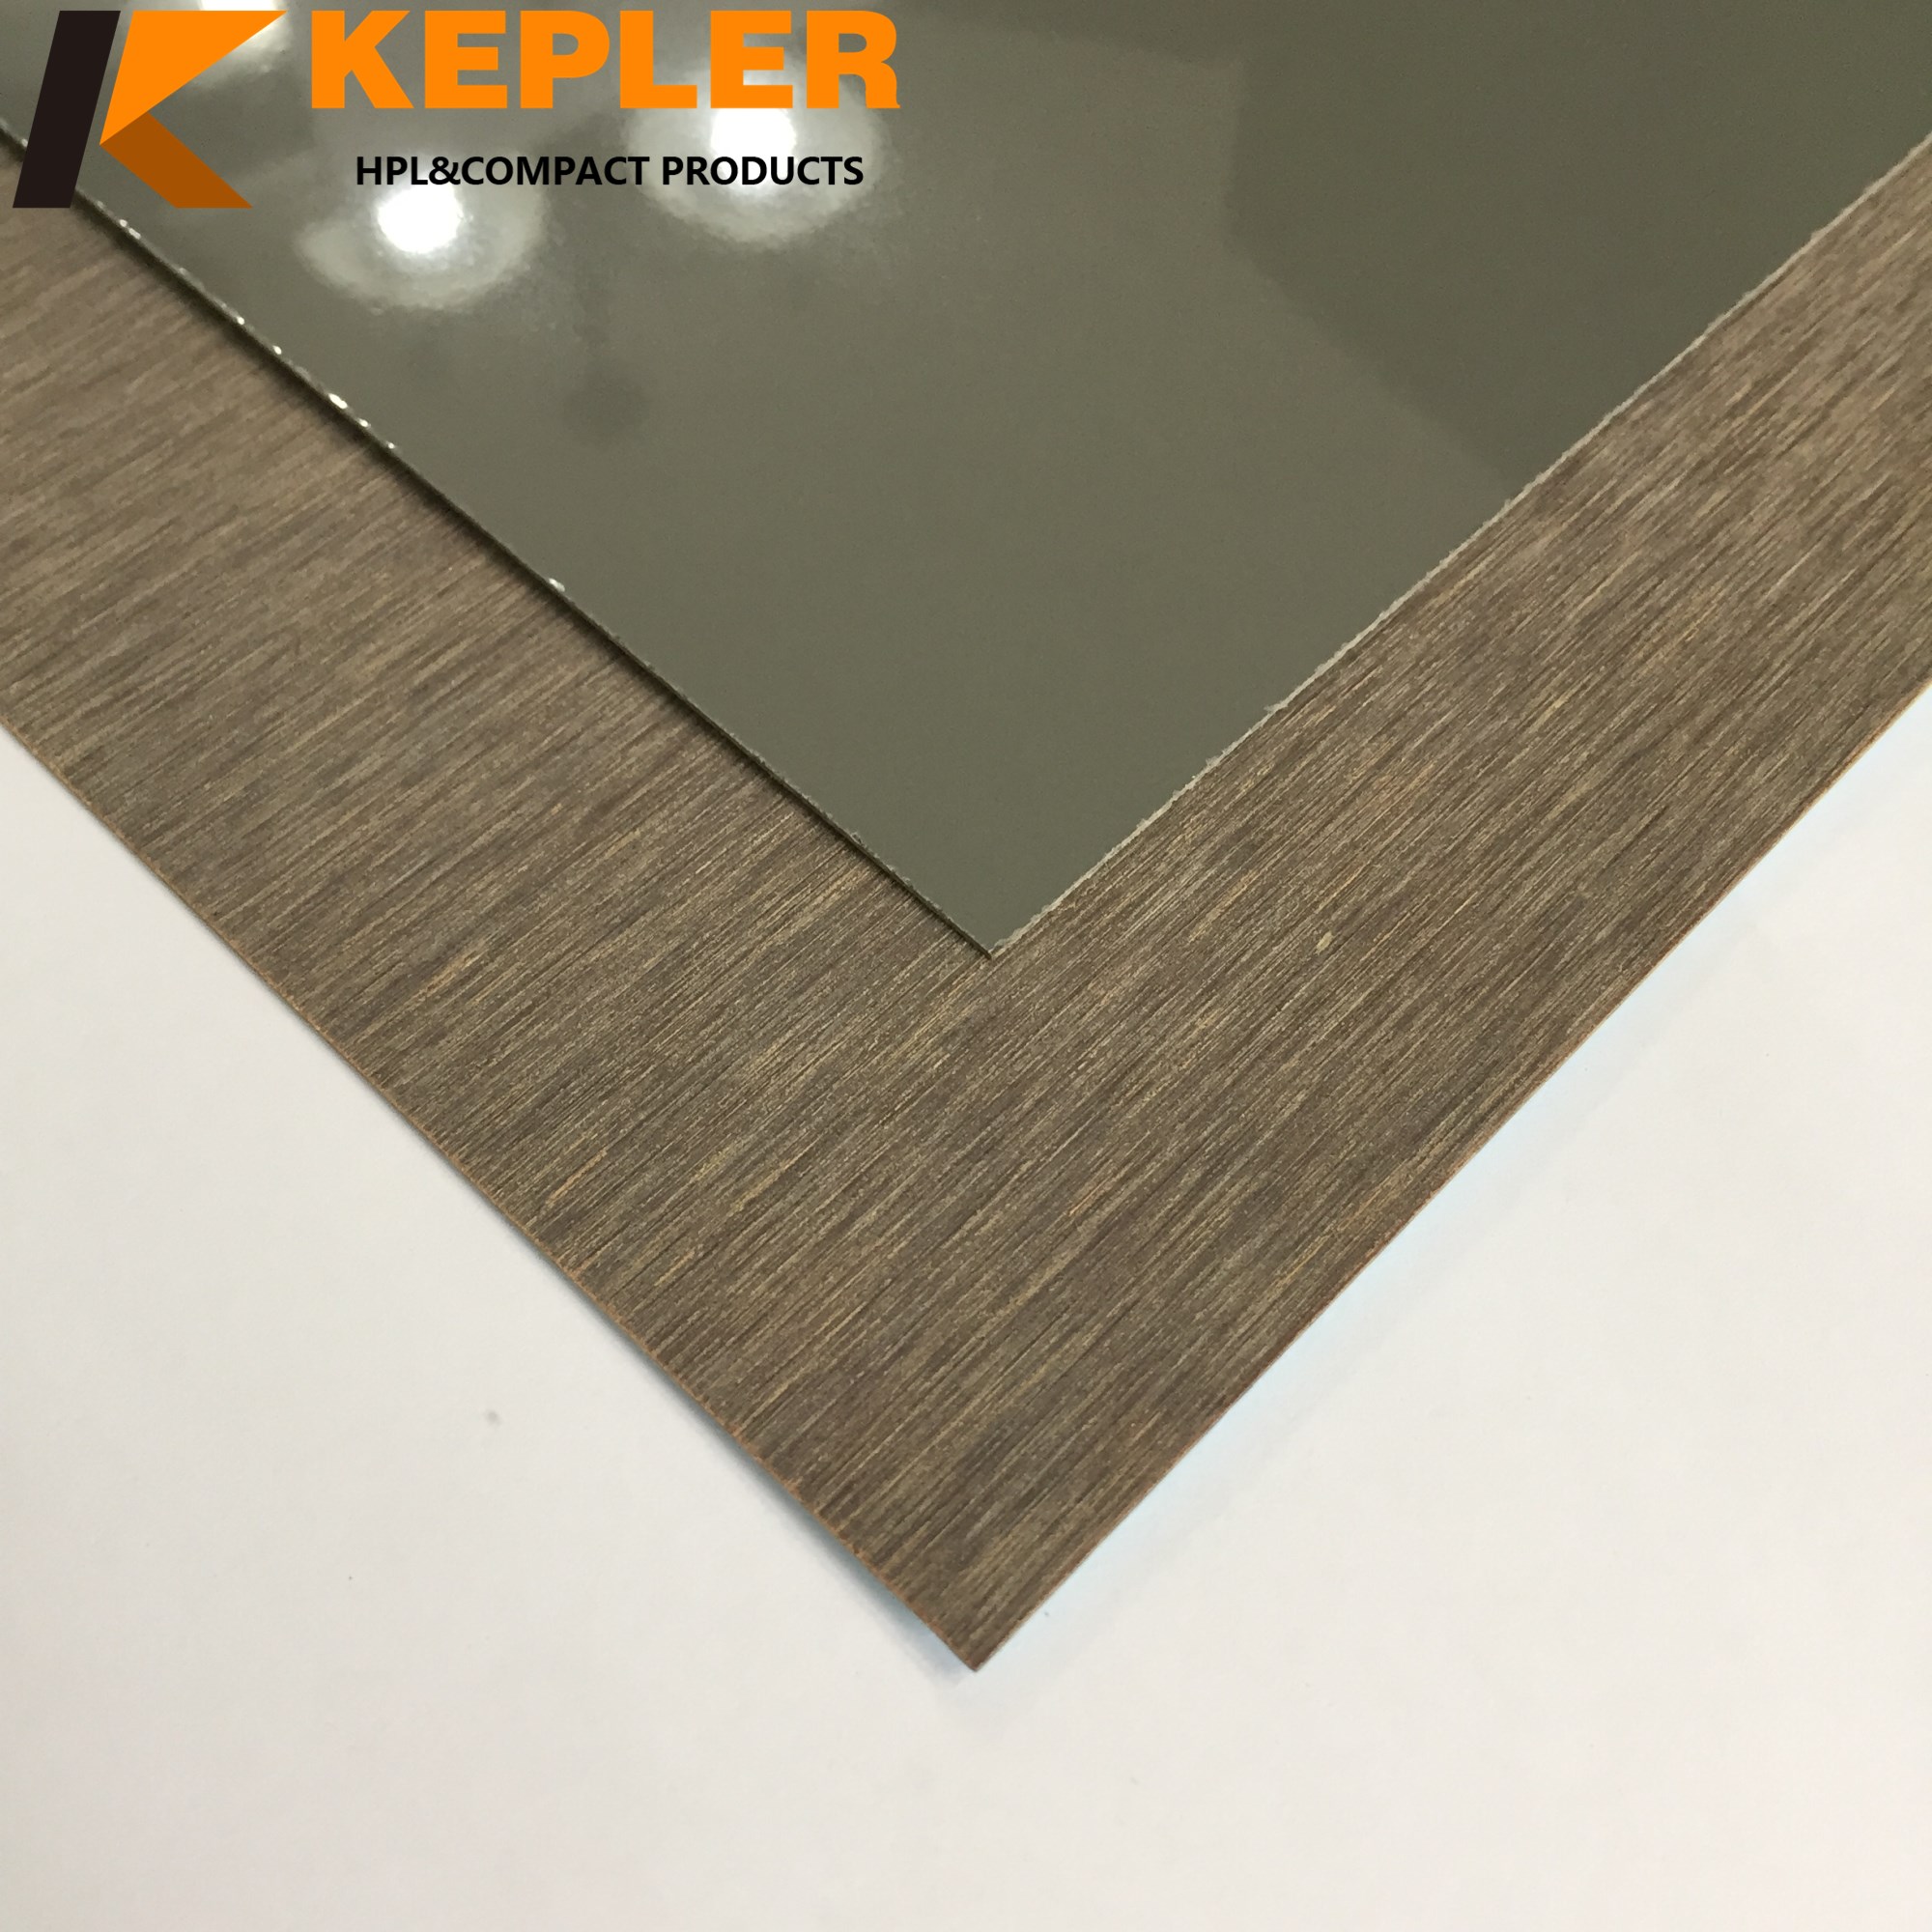 Kepler waterproof high glossy white high pressure laminate hpl sheet covered with plastic protective film